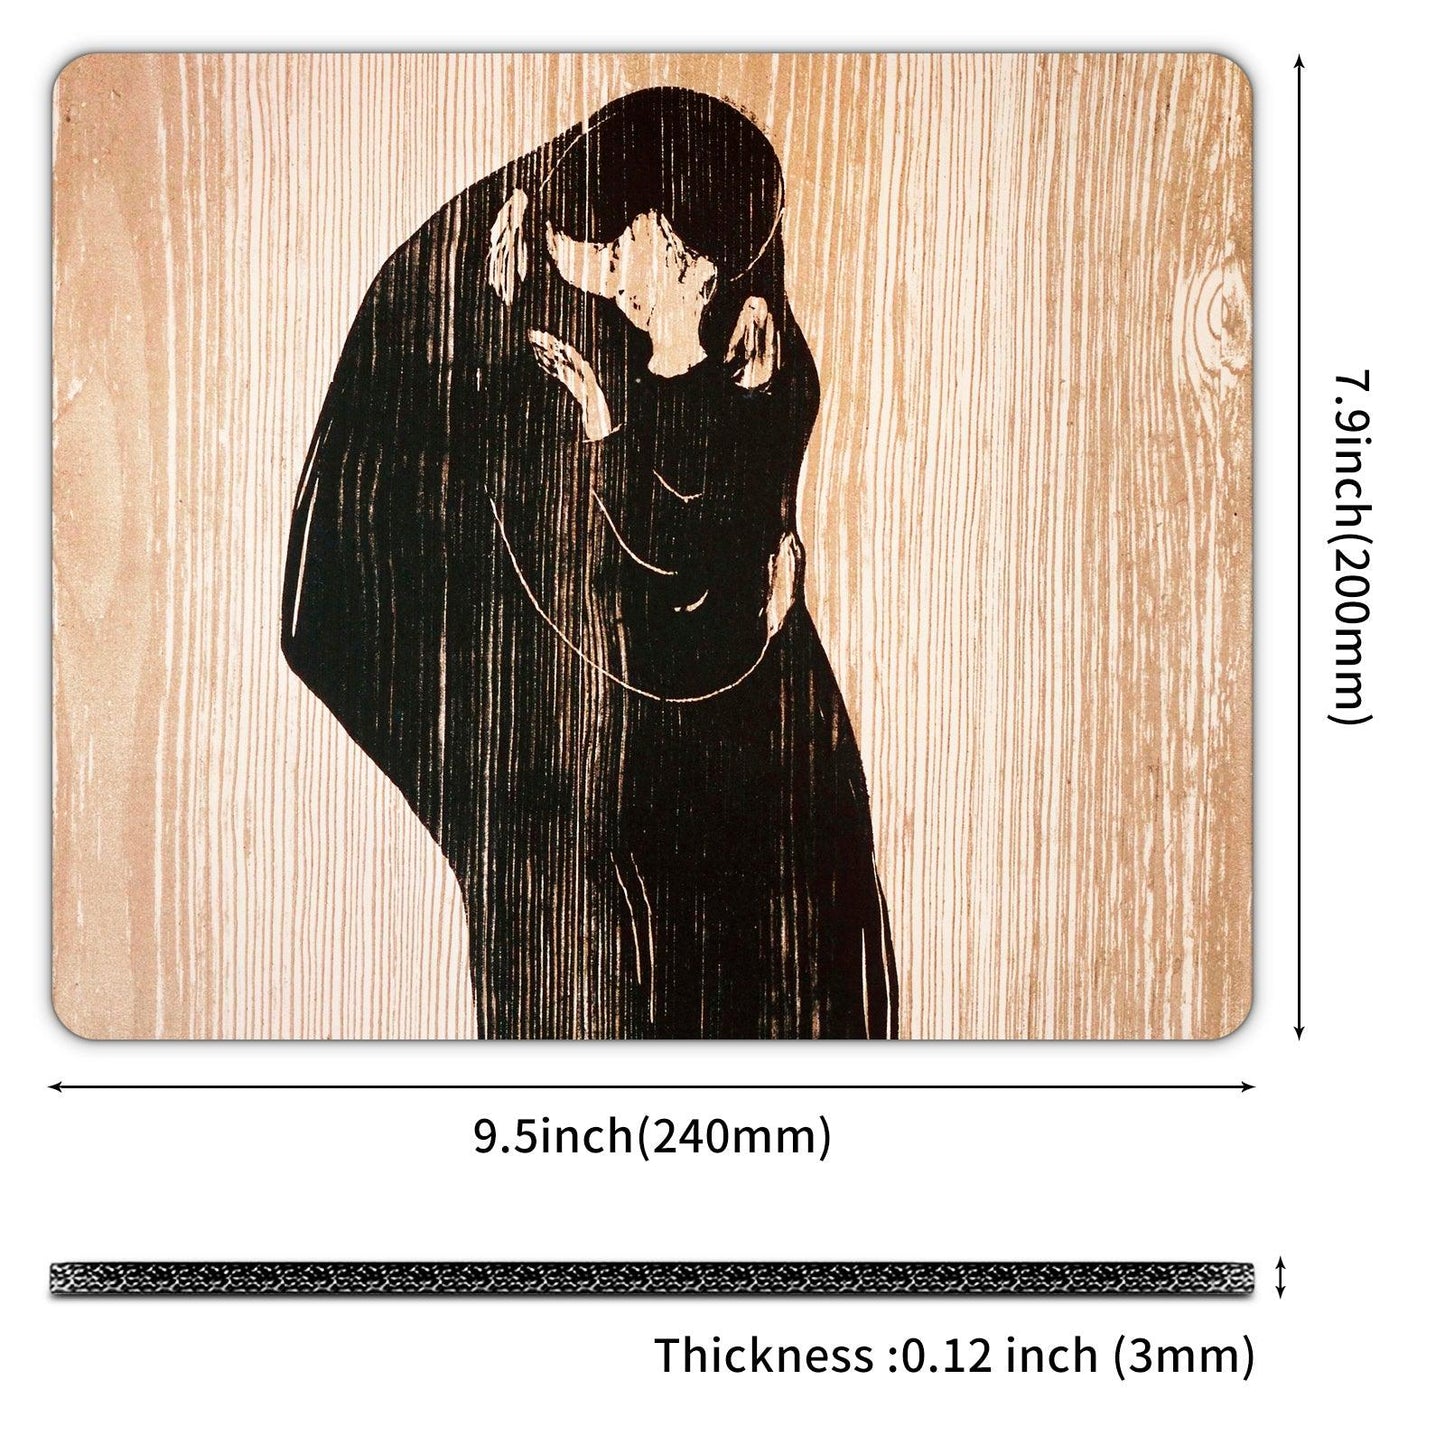 Art Square Mouse Pad 9.5 x 7.9 Inches (The Kiss by Edvard Munch) - Berkin Arts